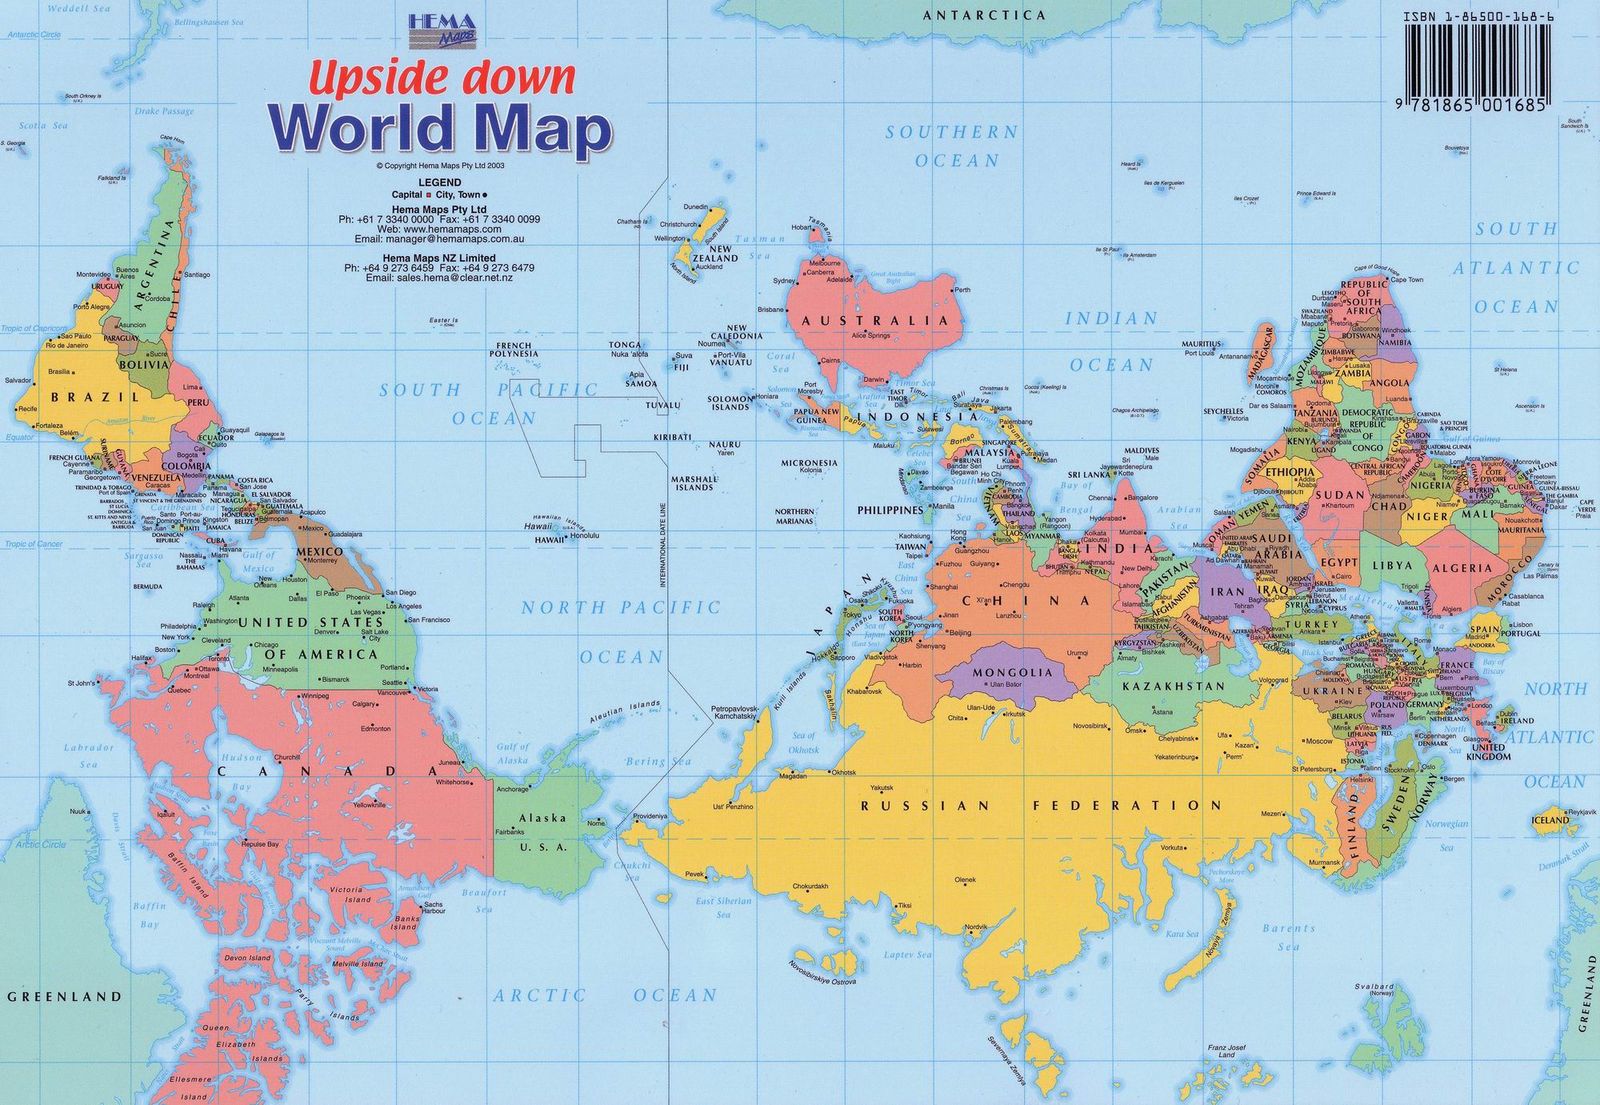 The Upside Down Map of the World